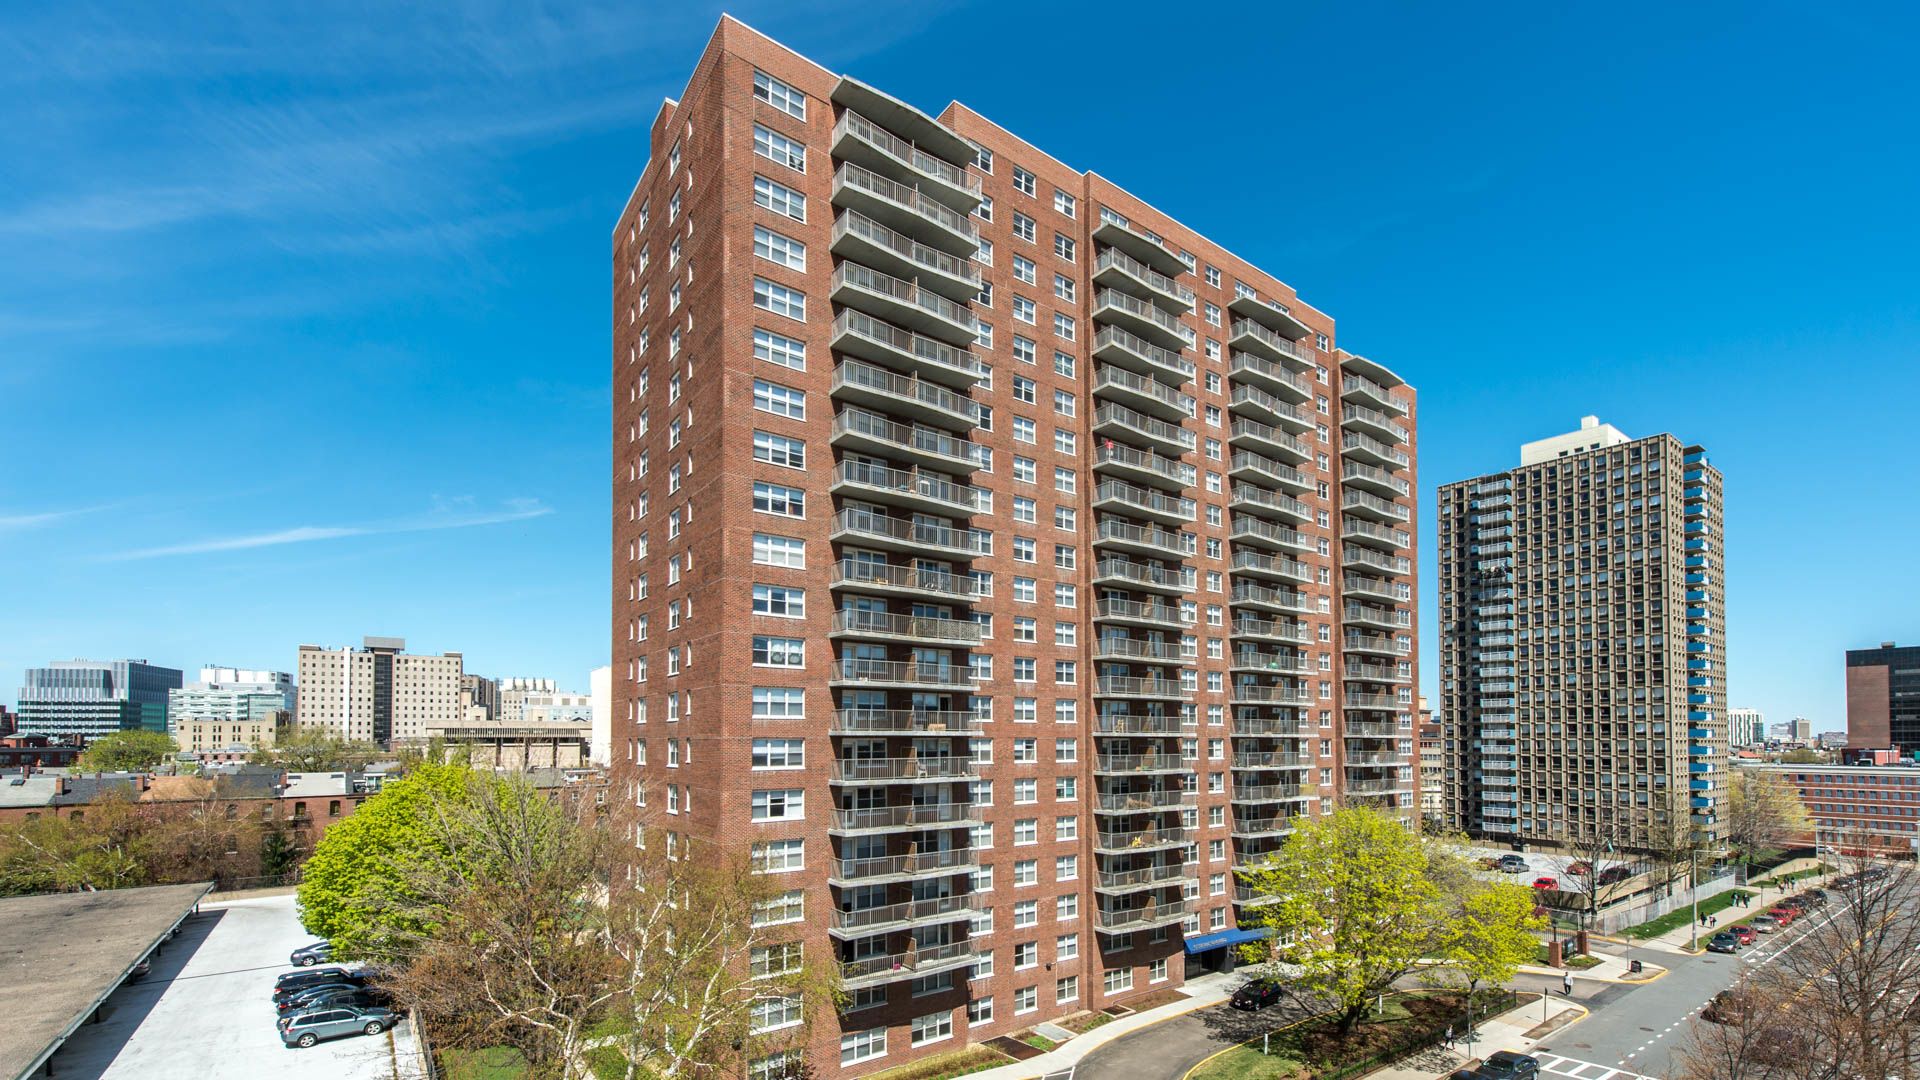 CityView at Longwood Apartments  Longwood Medical Center  75 St. Alphonsus Street 